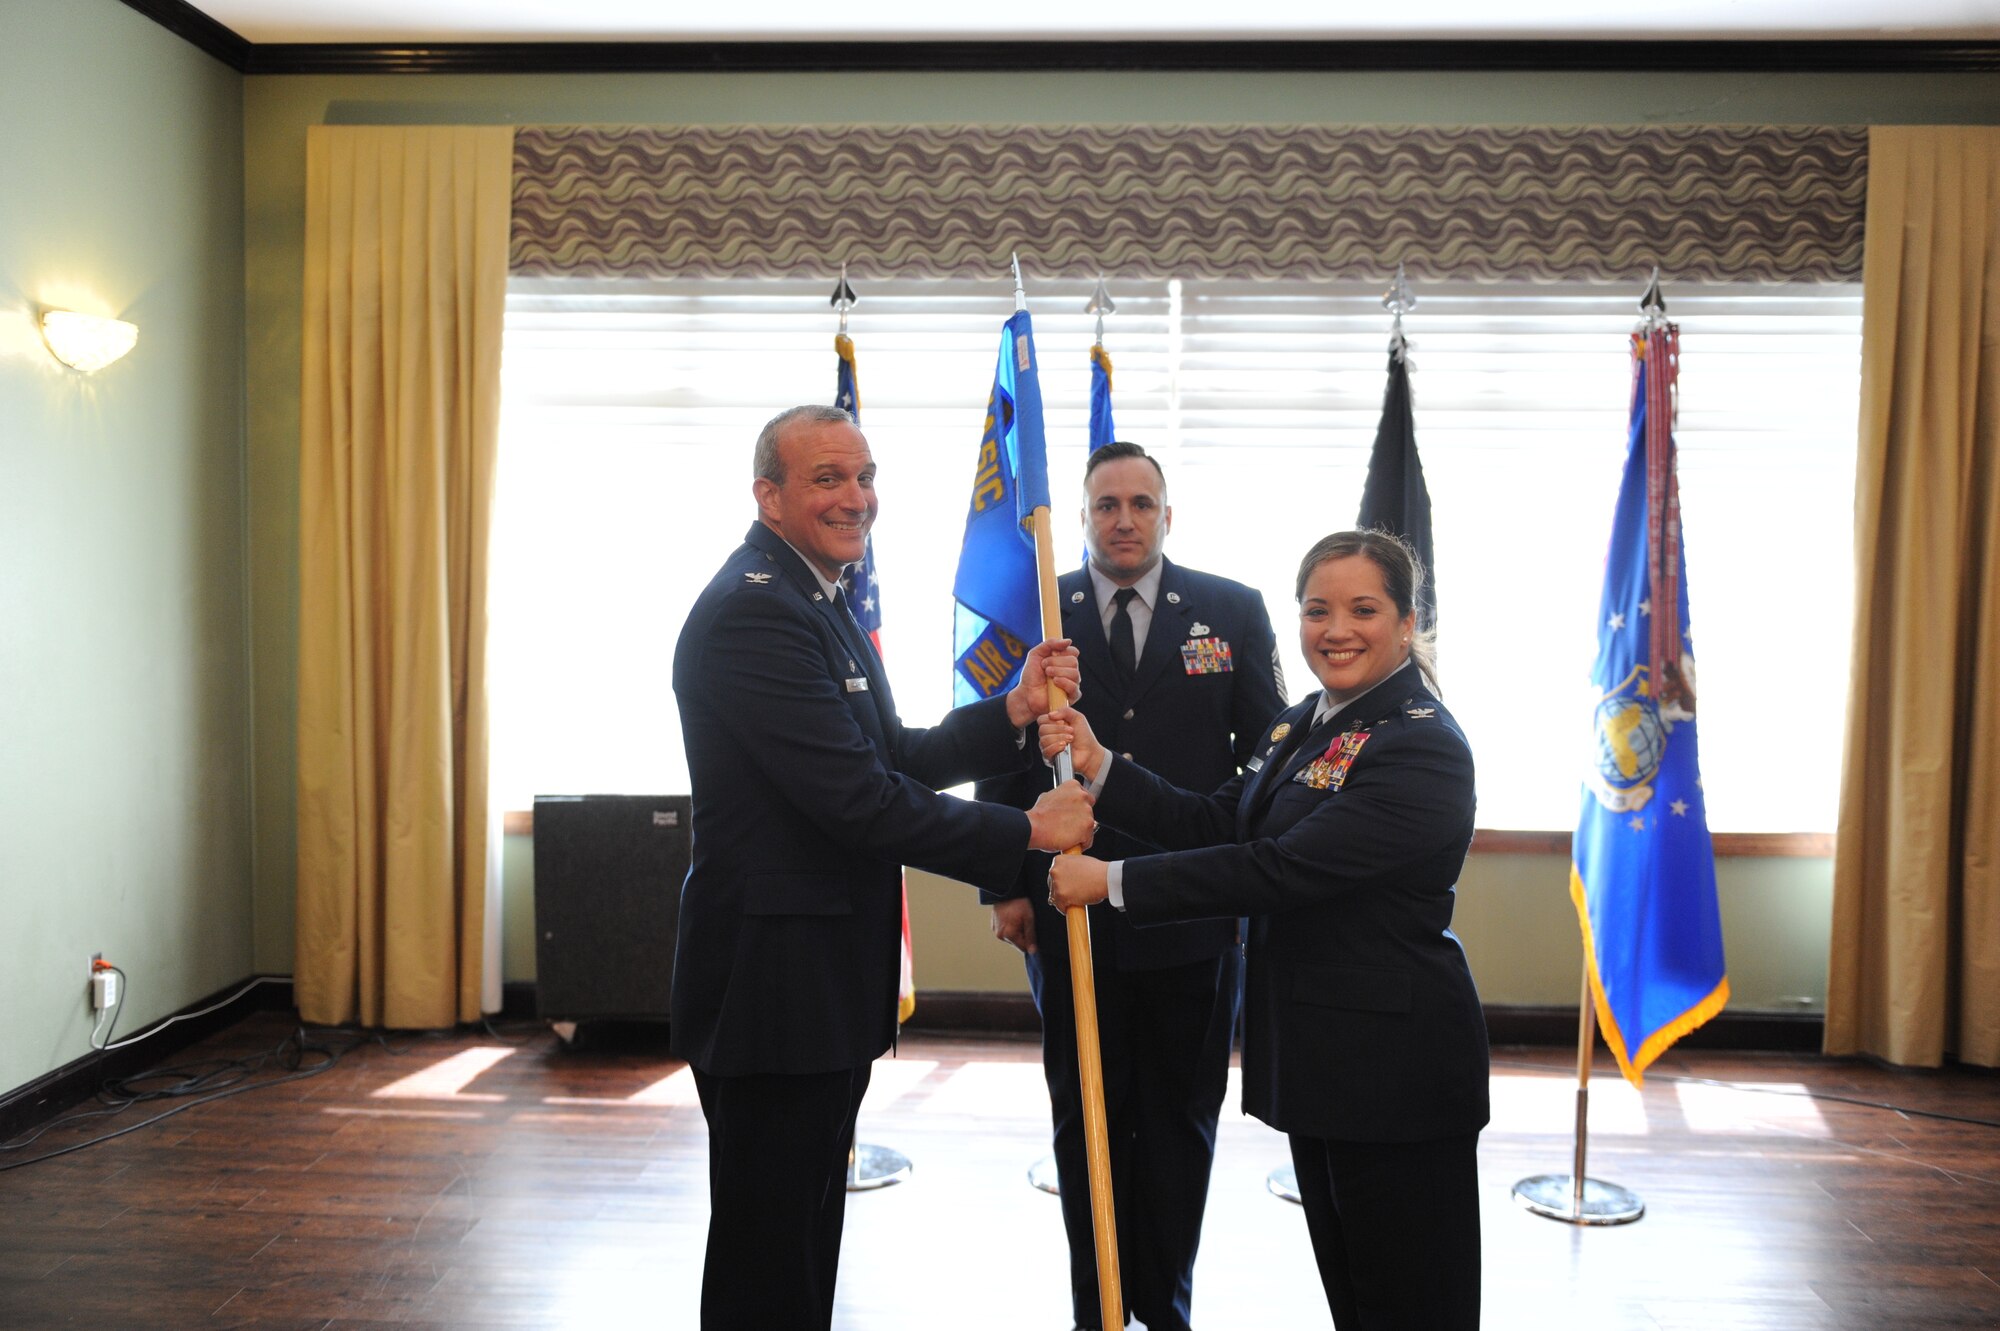 Col. Maurizio Calabrese (left), National Air and Space Intelligence Center commander, receives the ceremonial guidon from Col. Ariel G. Batungbacal, outbound Air and Cyberspace Intelligence Group commander, during the group’s change of command ceremony at the Wright-Patterson Club, June 1, 2022. Batungbacal relinquished command of the group and the next day, took command of National Air and Space Intelligence Center. (U.S. Air Force photo by Senior Airman Kristof J. Rixmann)